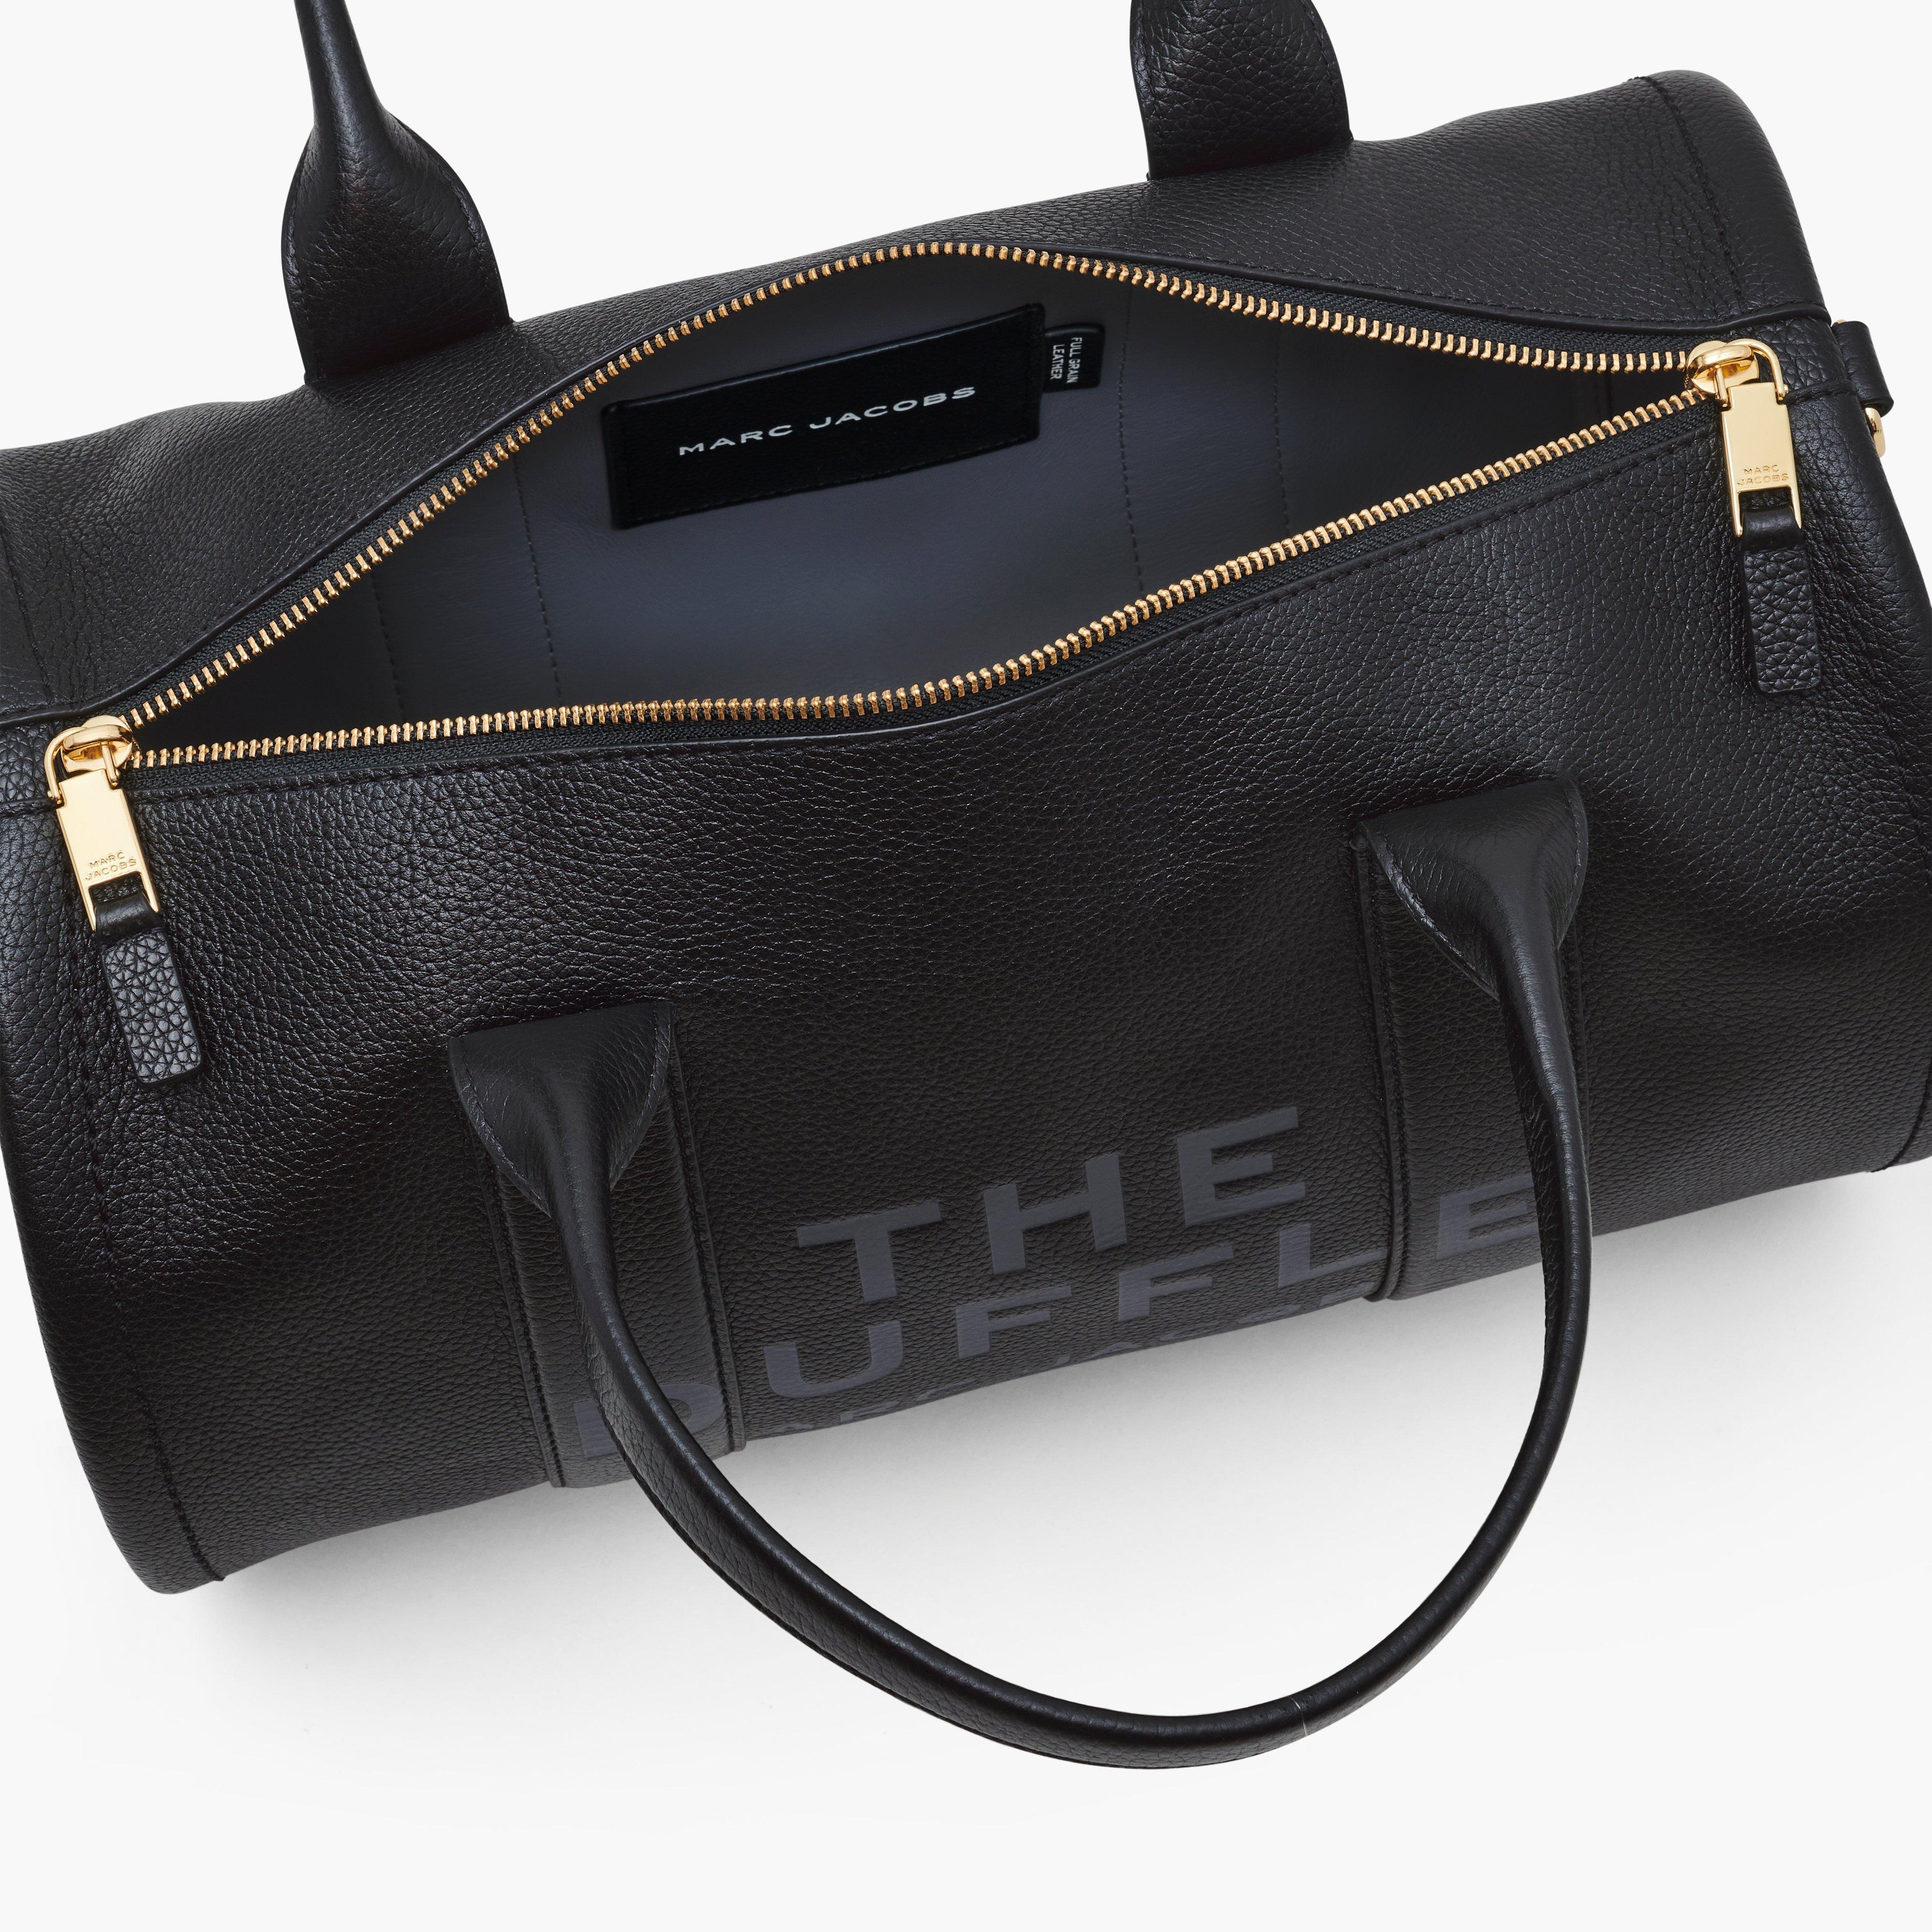 THE LEATHER LARGE DUFFLE BAG - 6